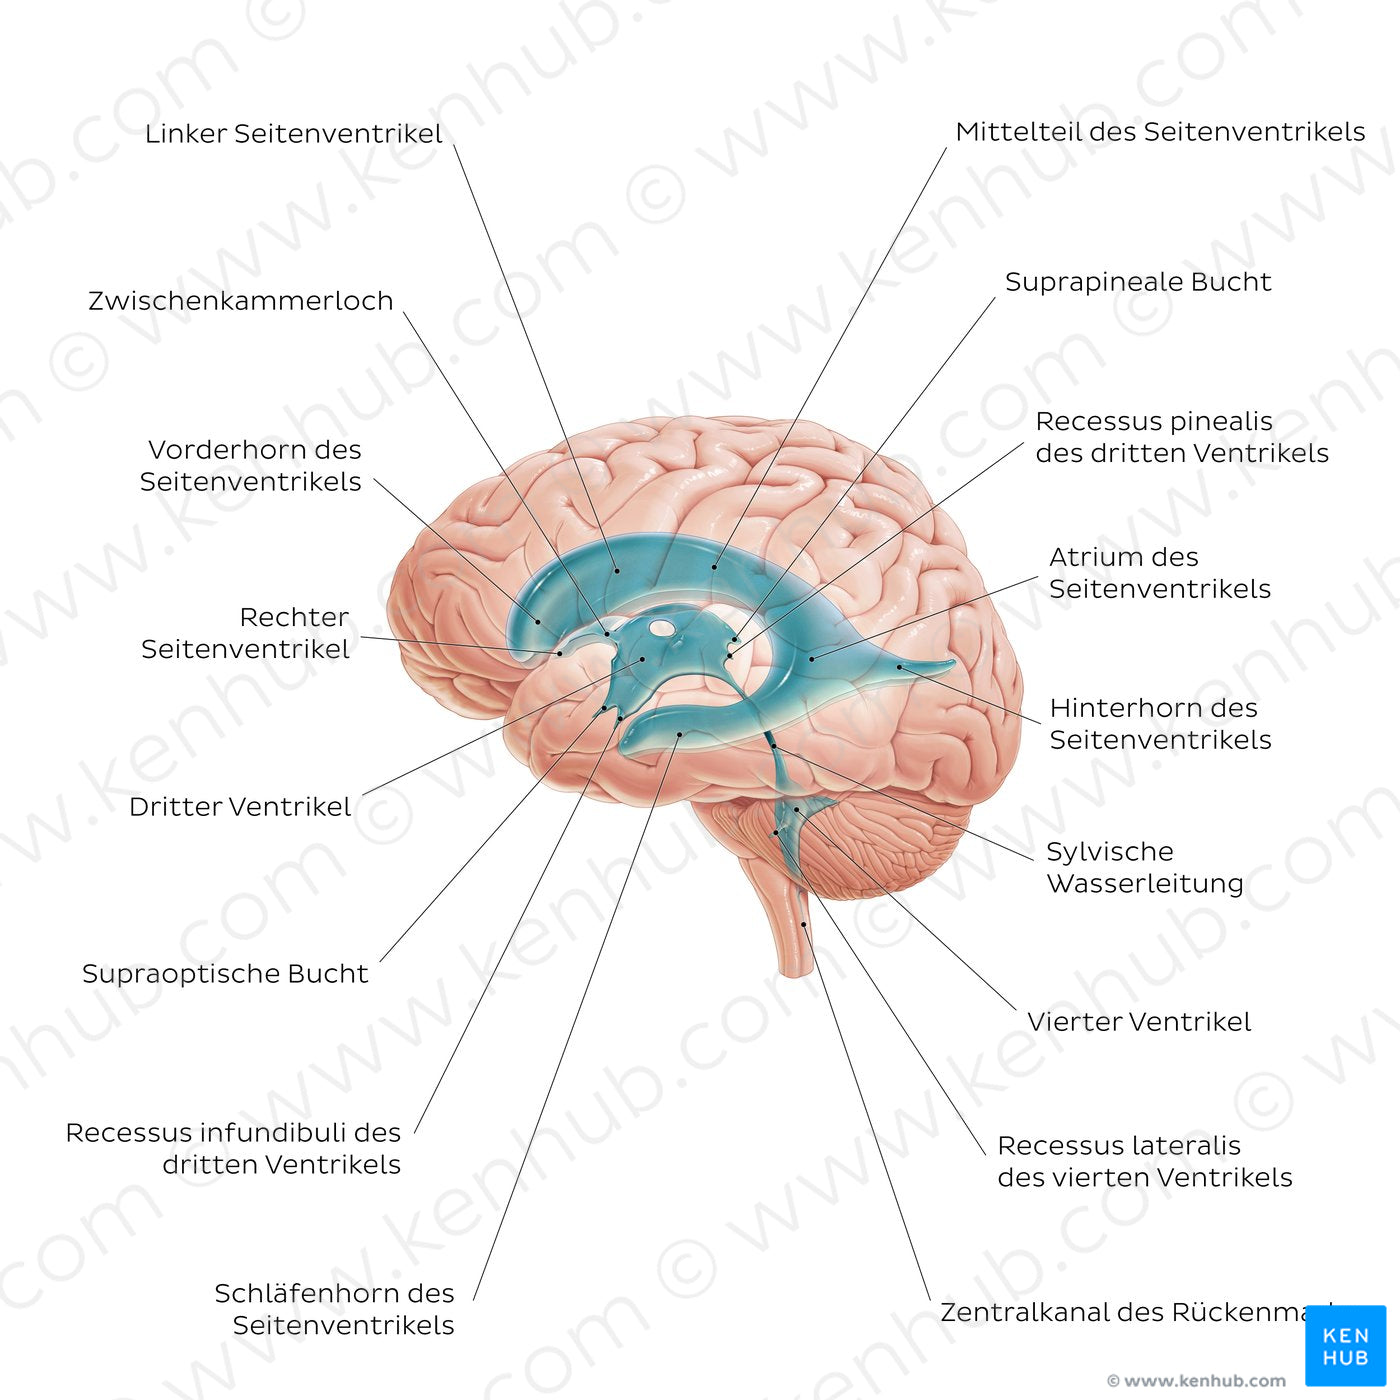 Ventricles of the brain (German)